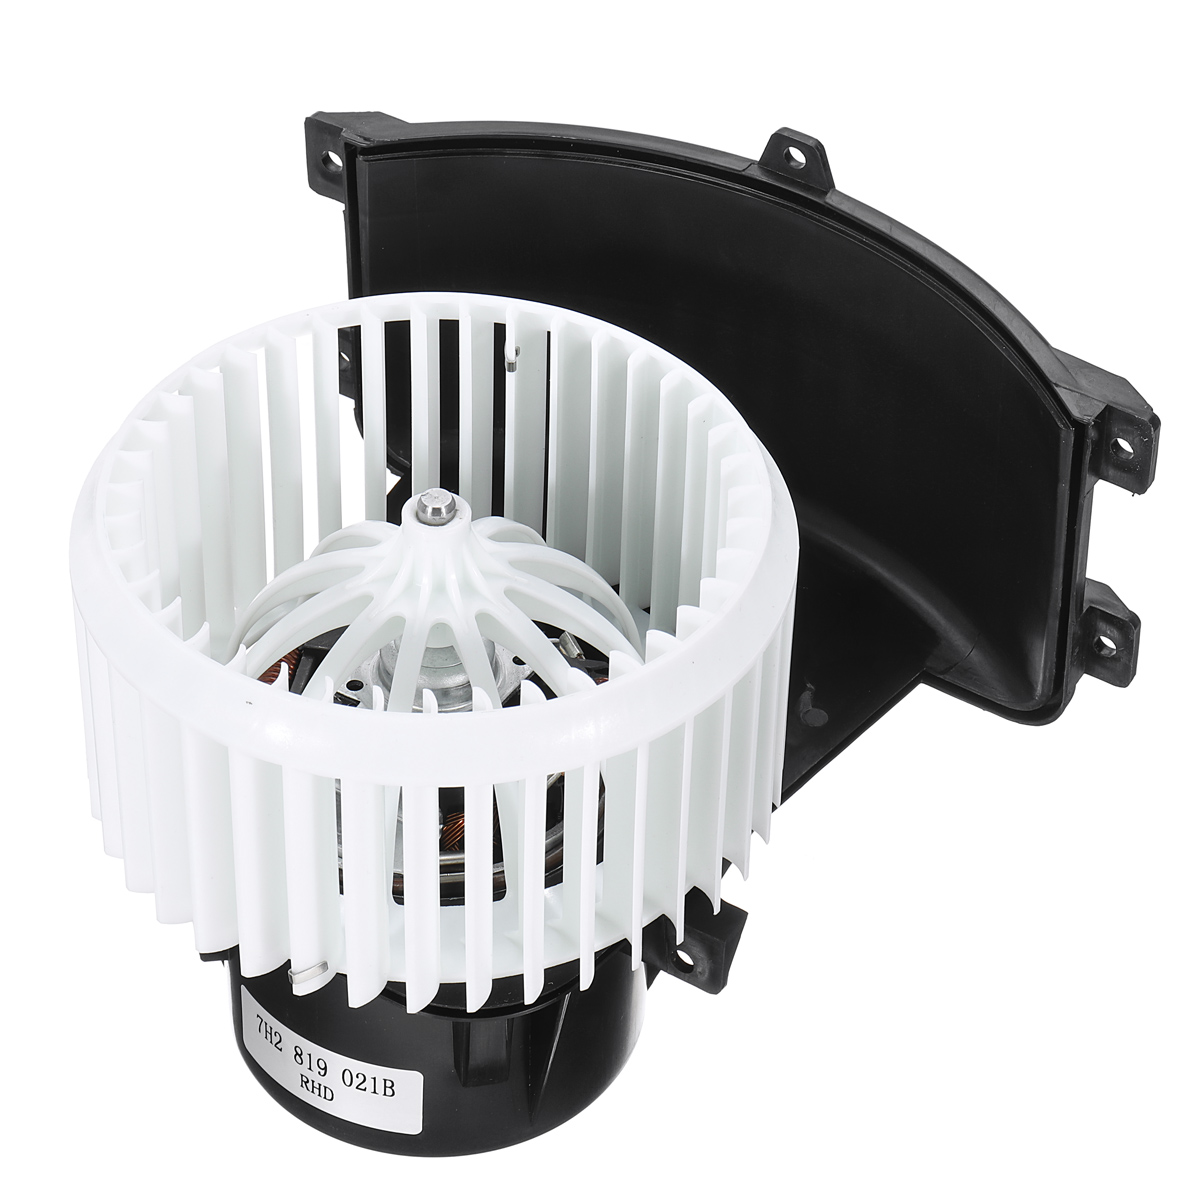 

Car Front A/C Heater Blower Fan Motor RHD For VW Transporter T5 2003-2014 Right Hand Driver 7E0819021C 7H2819021A/B 7E2819021C Replacement